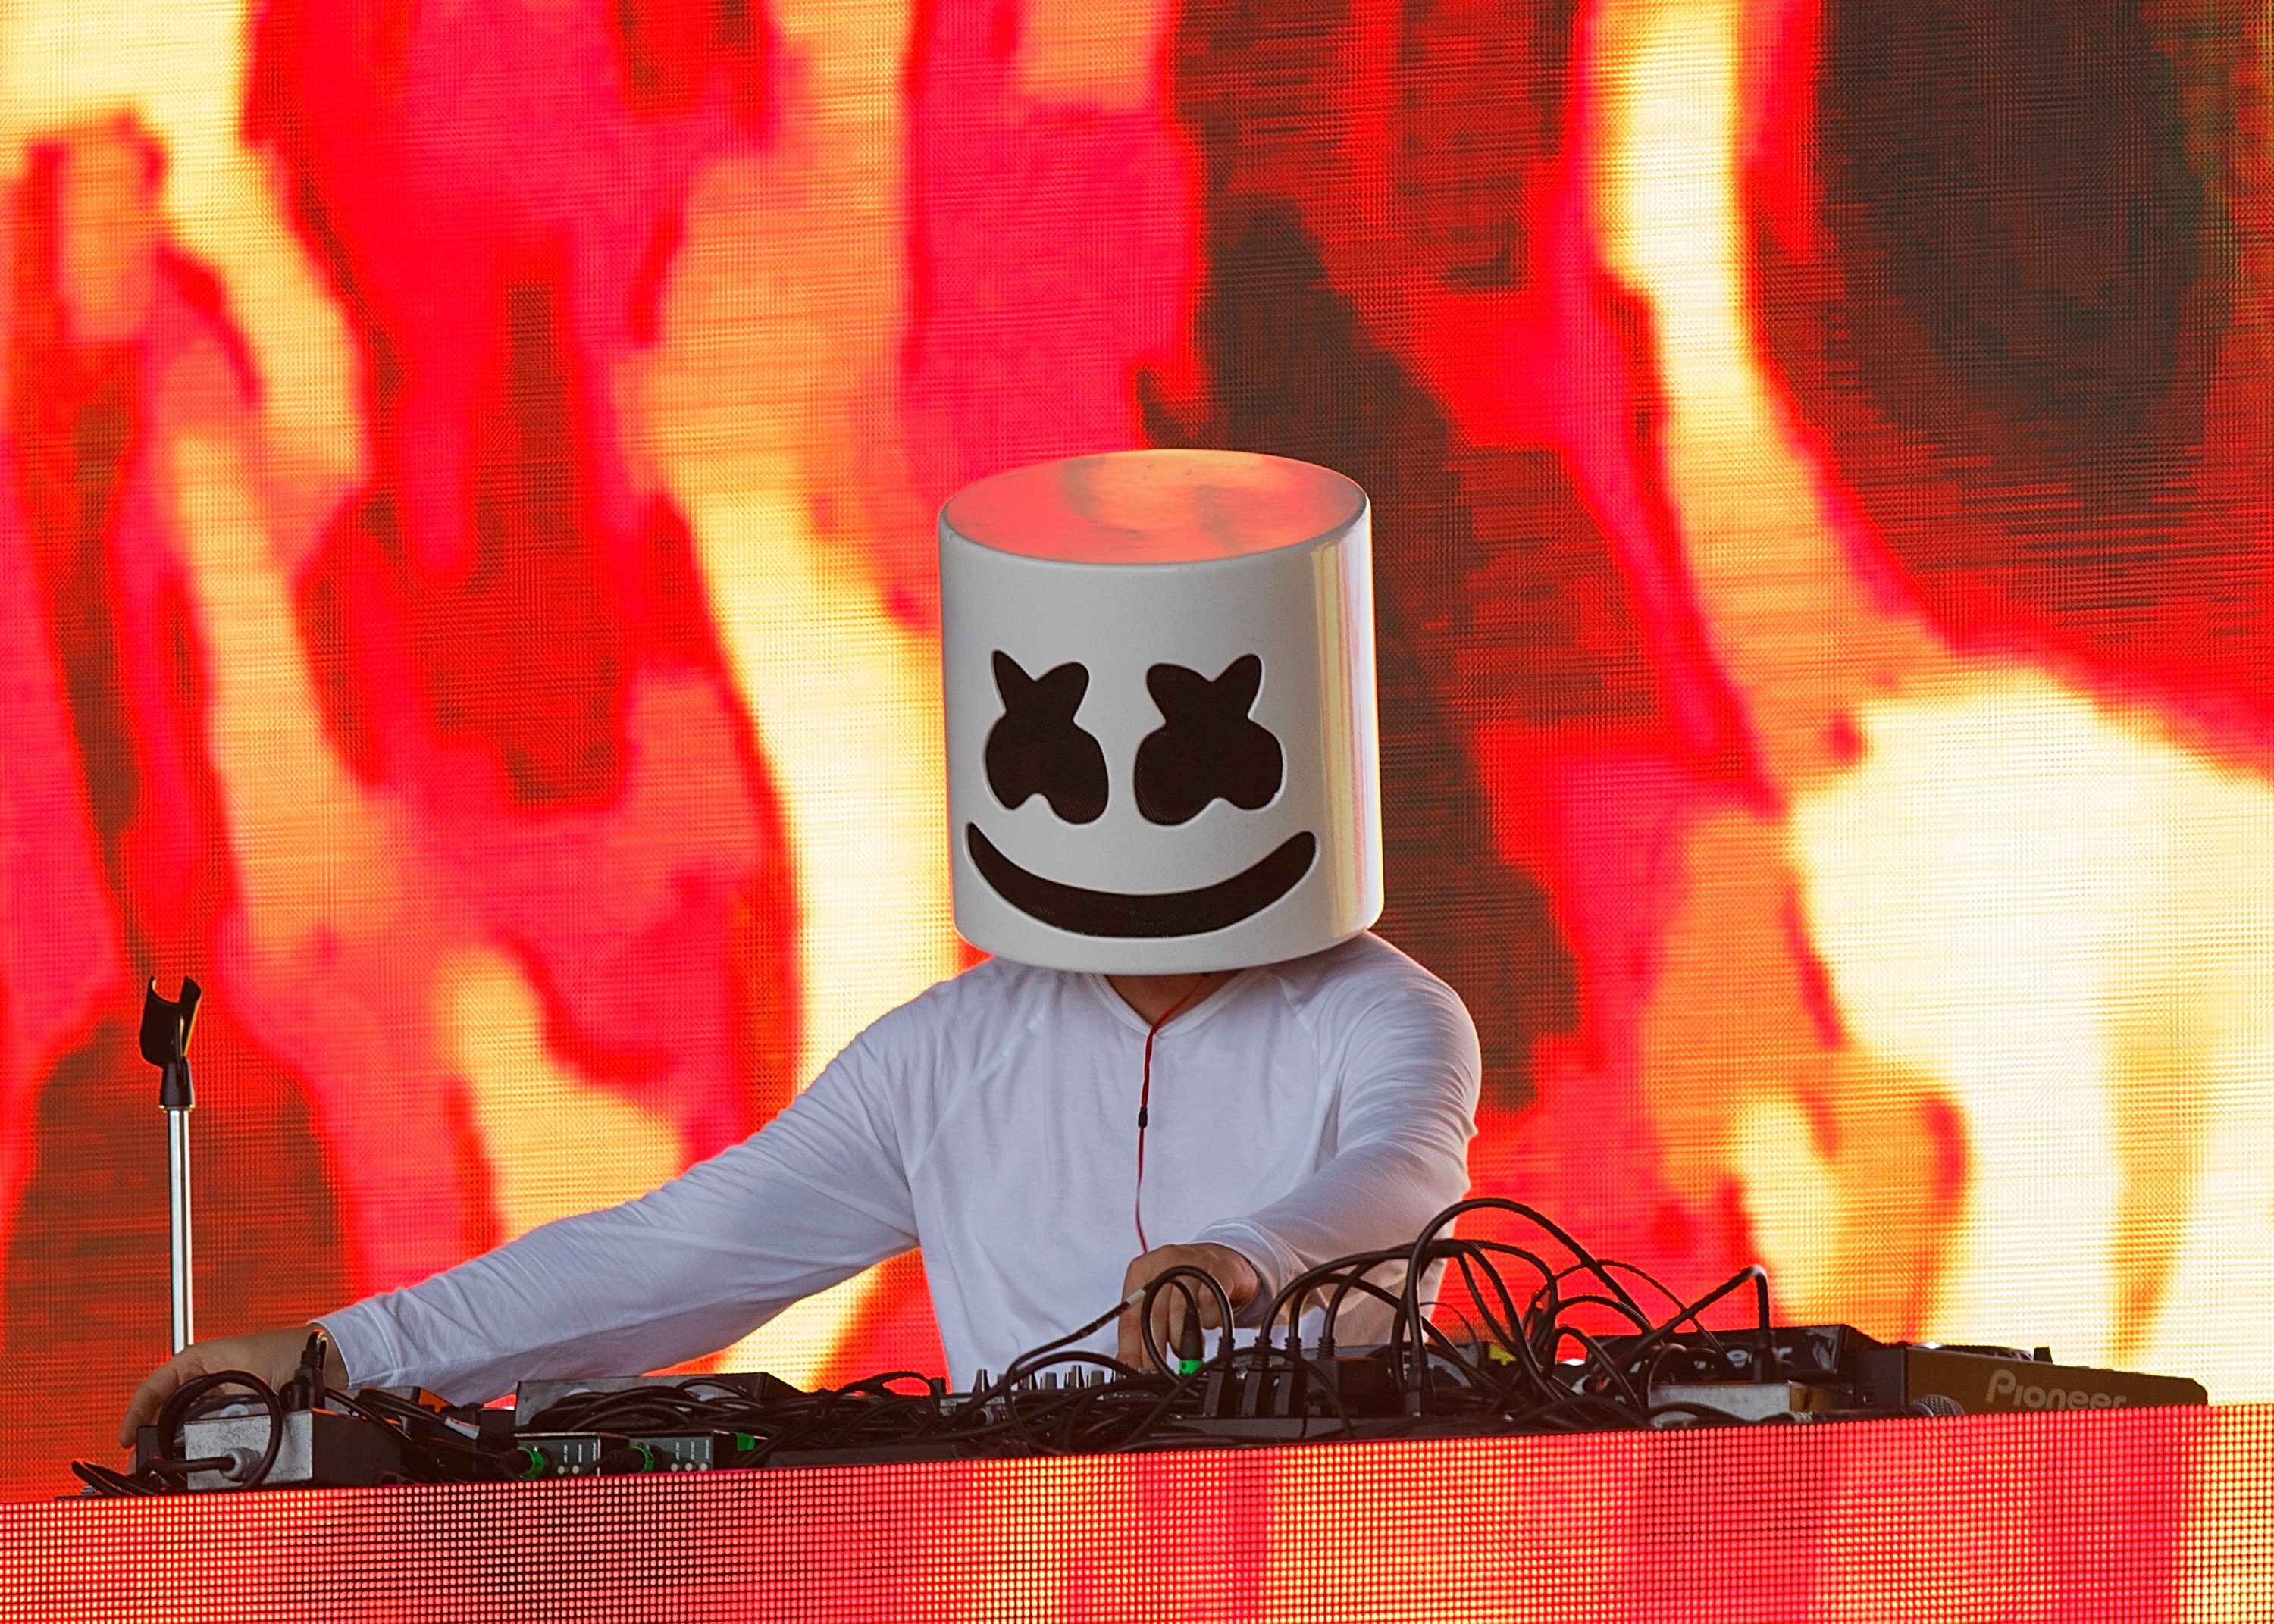 DJ Marshmello performing onstage at the FVDED In The Park music festival in Canada aon July 2, 2016 | Source: Getty Images